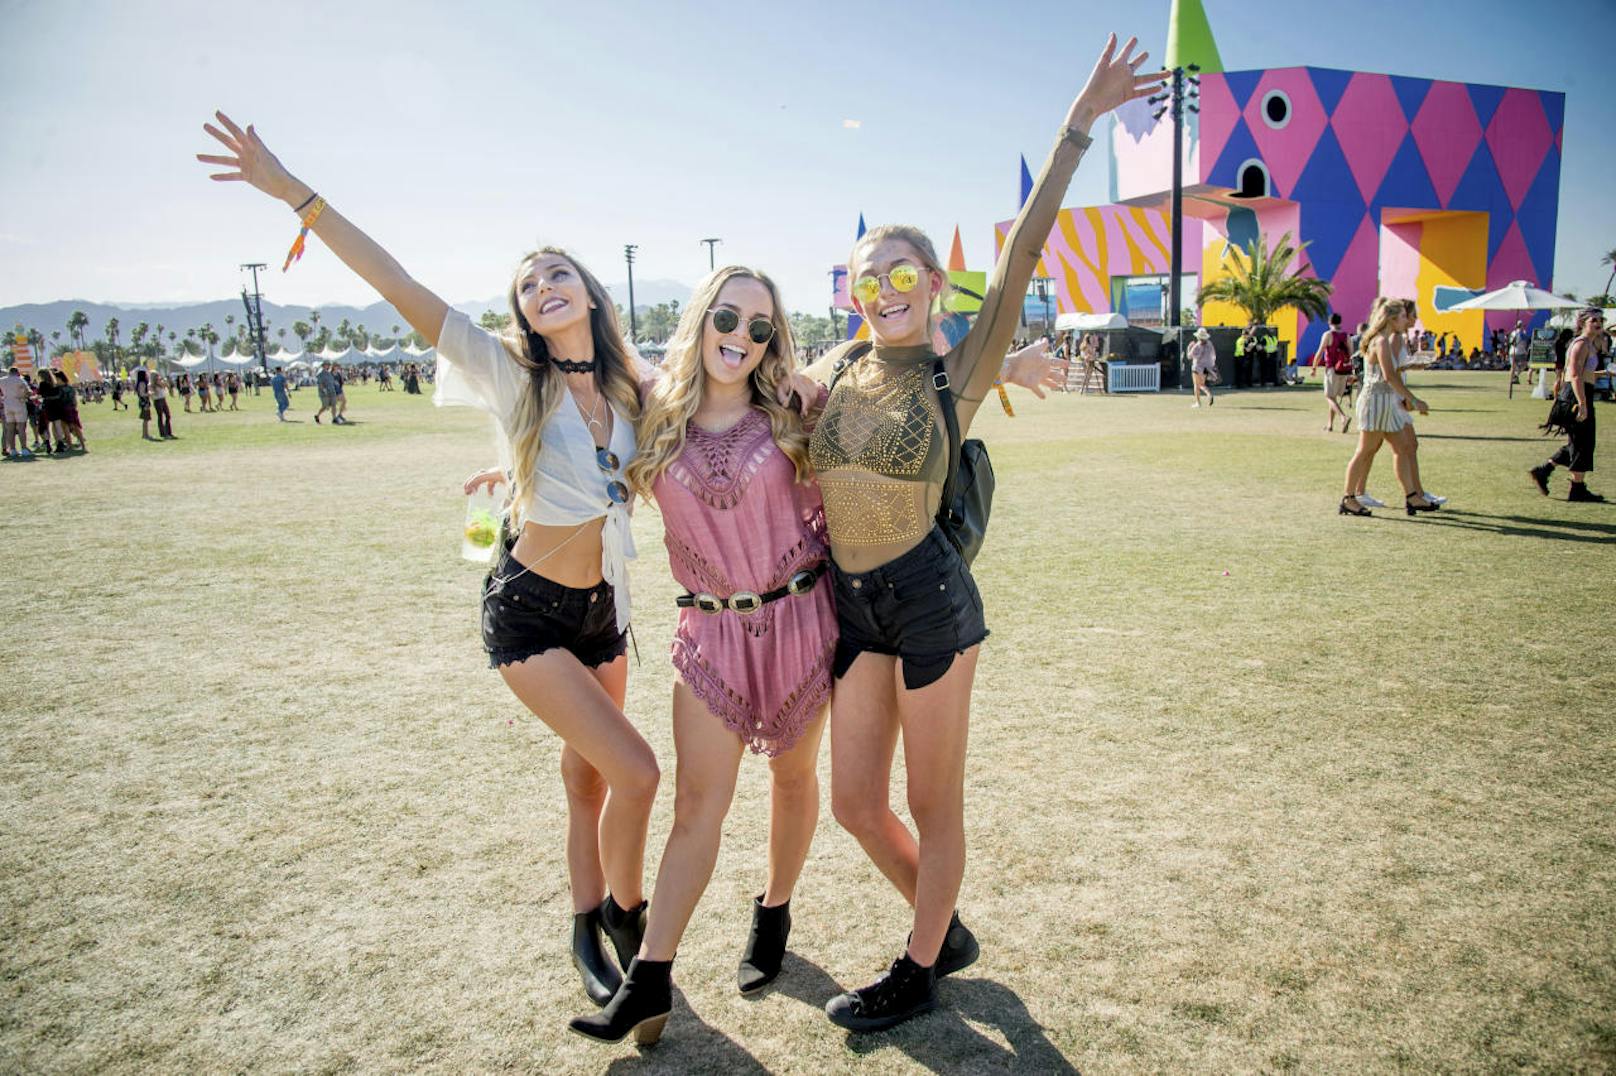 Festival goers Autumn Mosley, from left, Cortlyn Morales and Cary Gutin pose at Coachella Music & Arts Festival at the Empire Polo Club on Saturday, April 15, 2017, in Indio, Calif. (Photo by Amy Harris/Invision/AP)